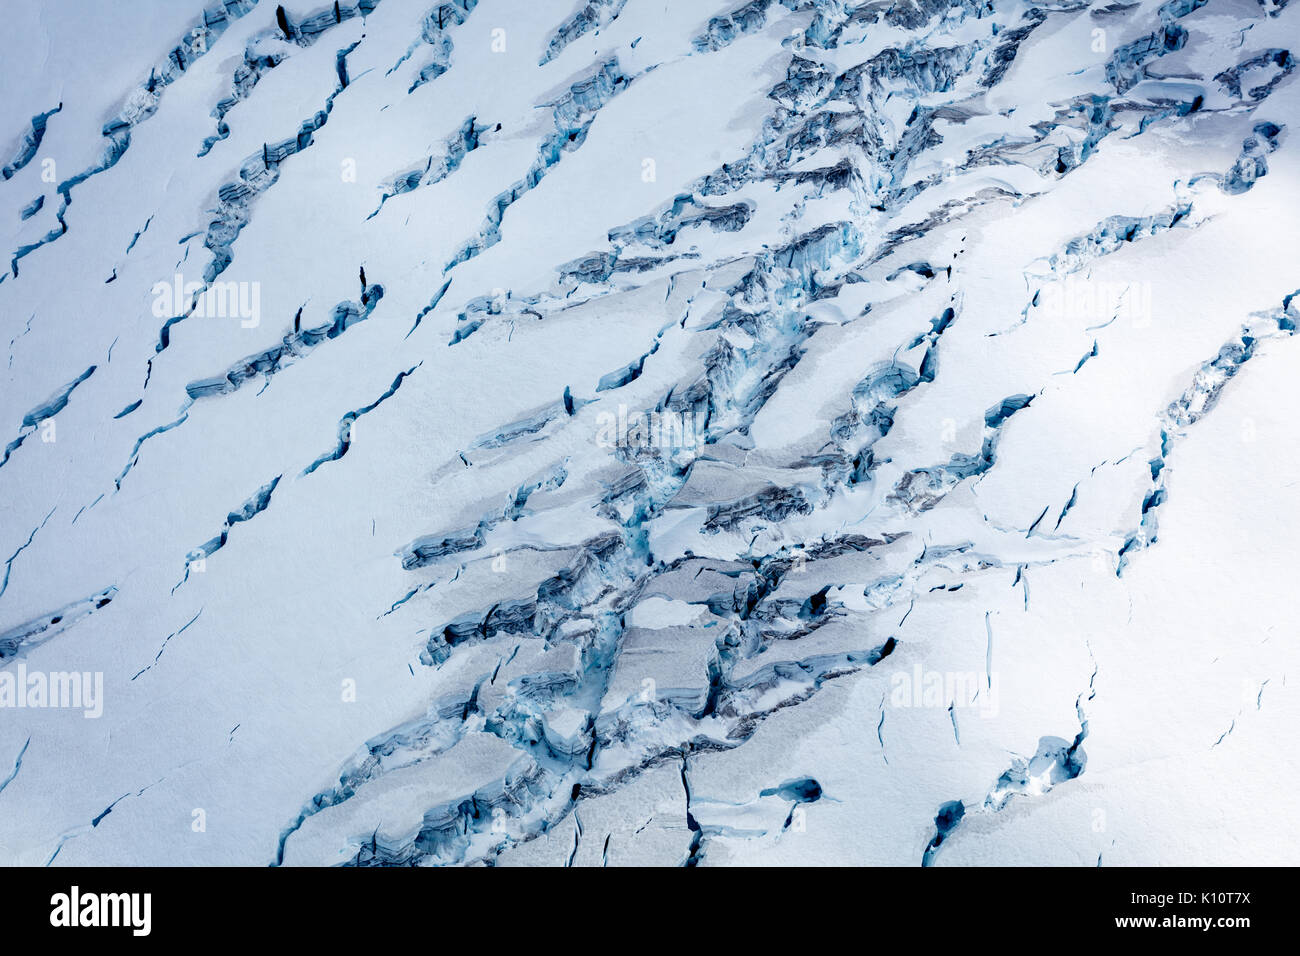 Aerial view of blue pattern of deep glacier ravines atop large active glacier Stock Photo